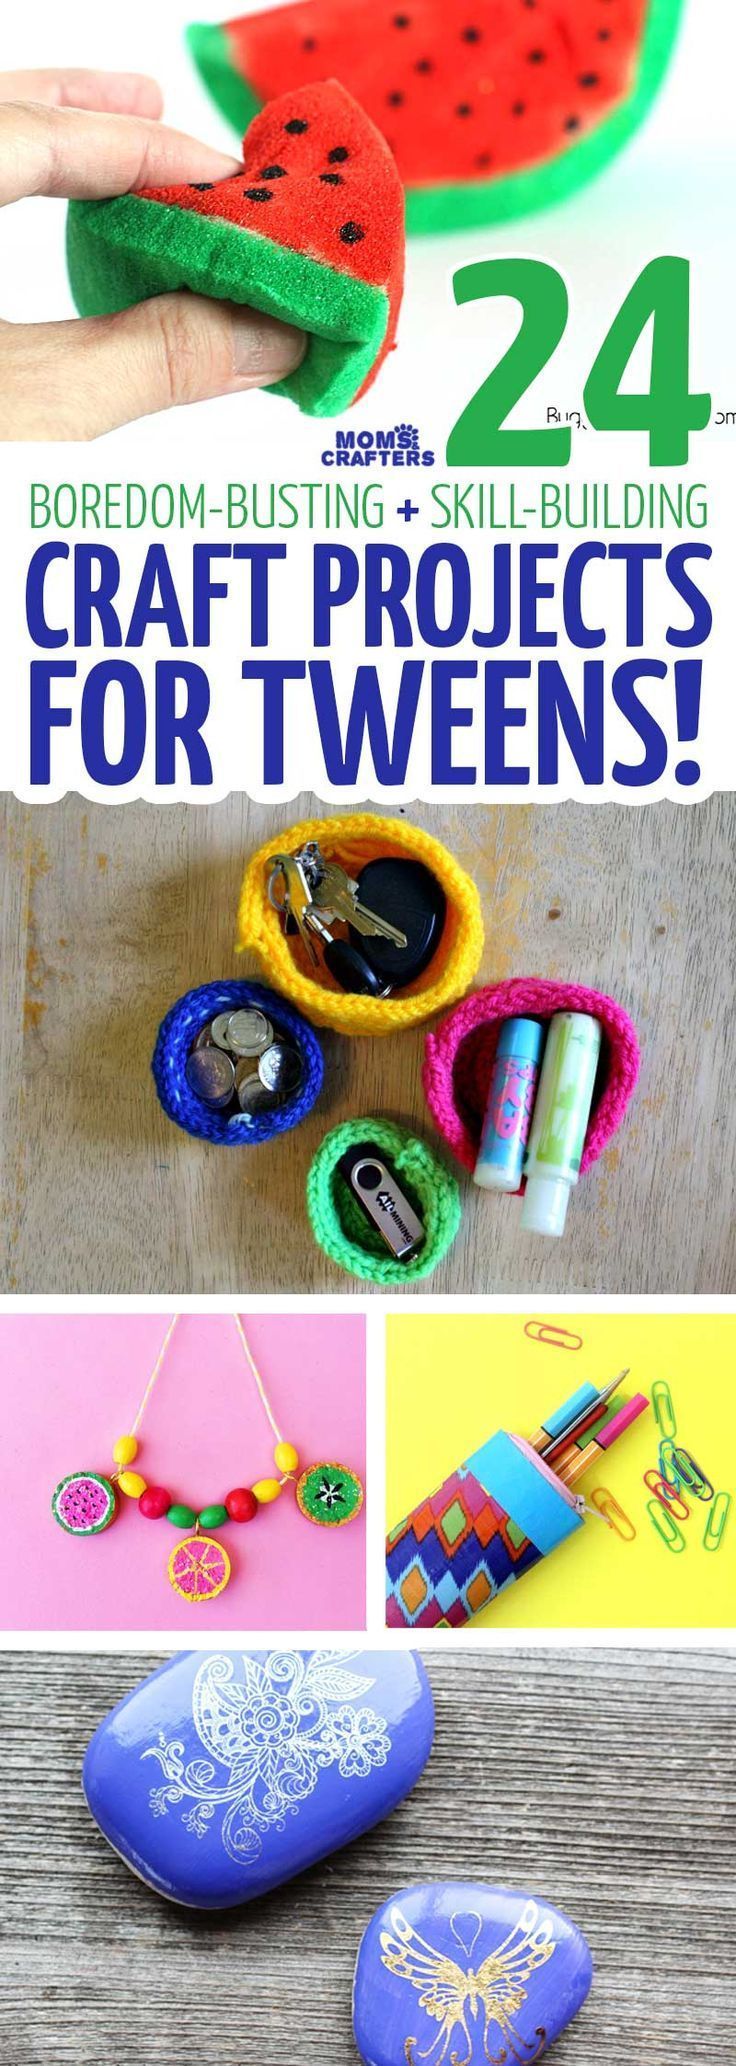 Craft Projects for Tweens - 24 Cool Crafts and Skills to Learn - Craft Projects for Tweens - 24 Cool Crafts and Skills to Learn -   19 simple diy For Teens ideas